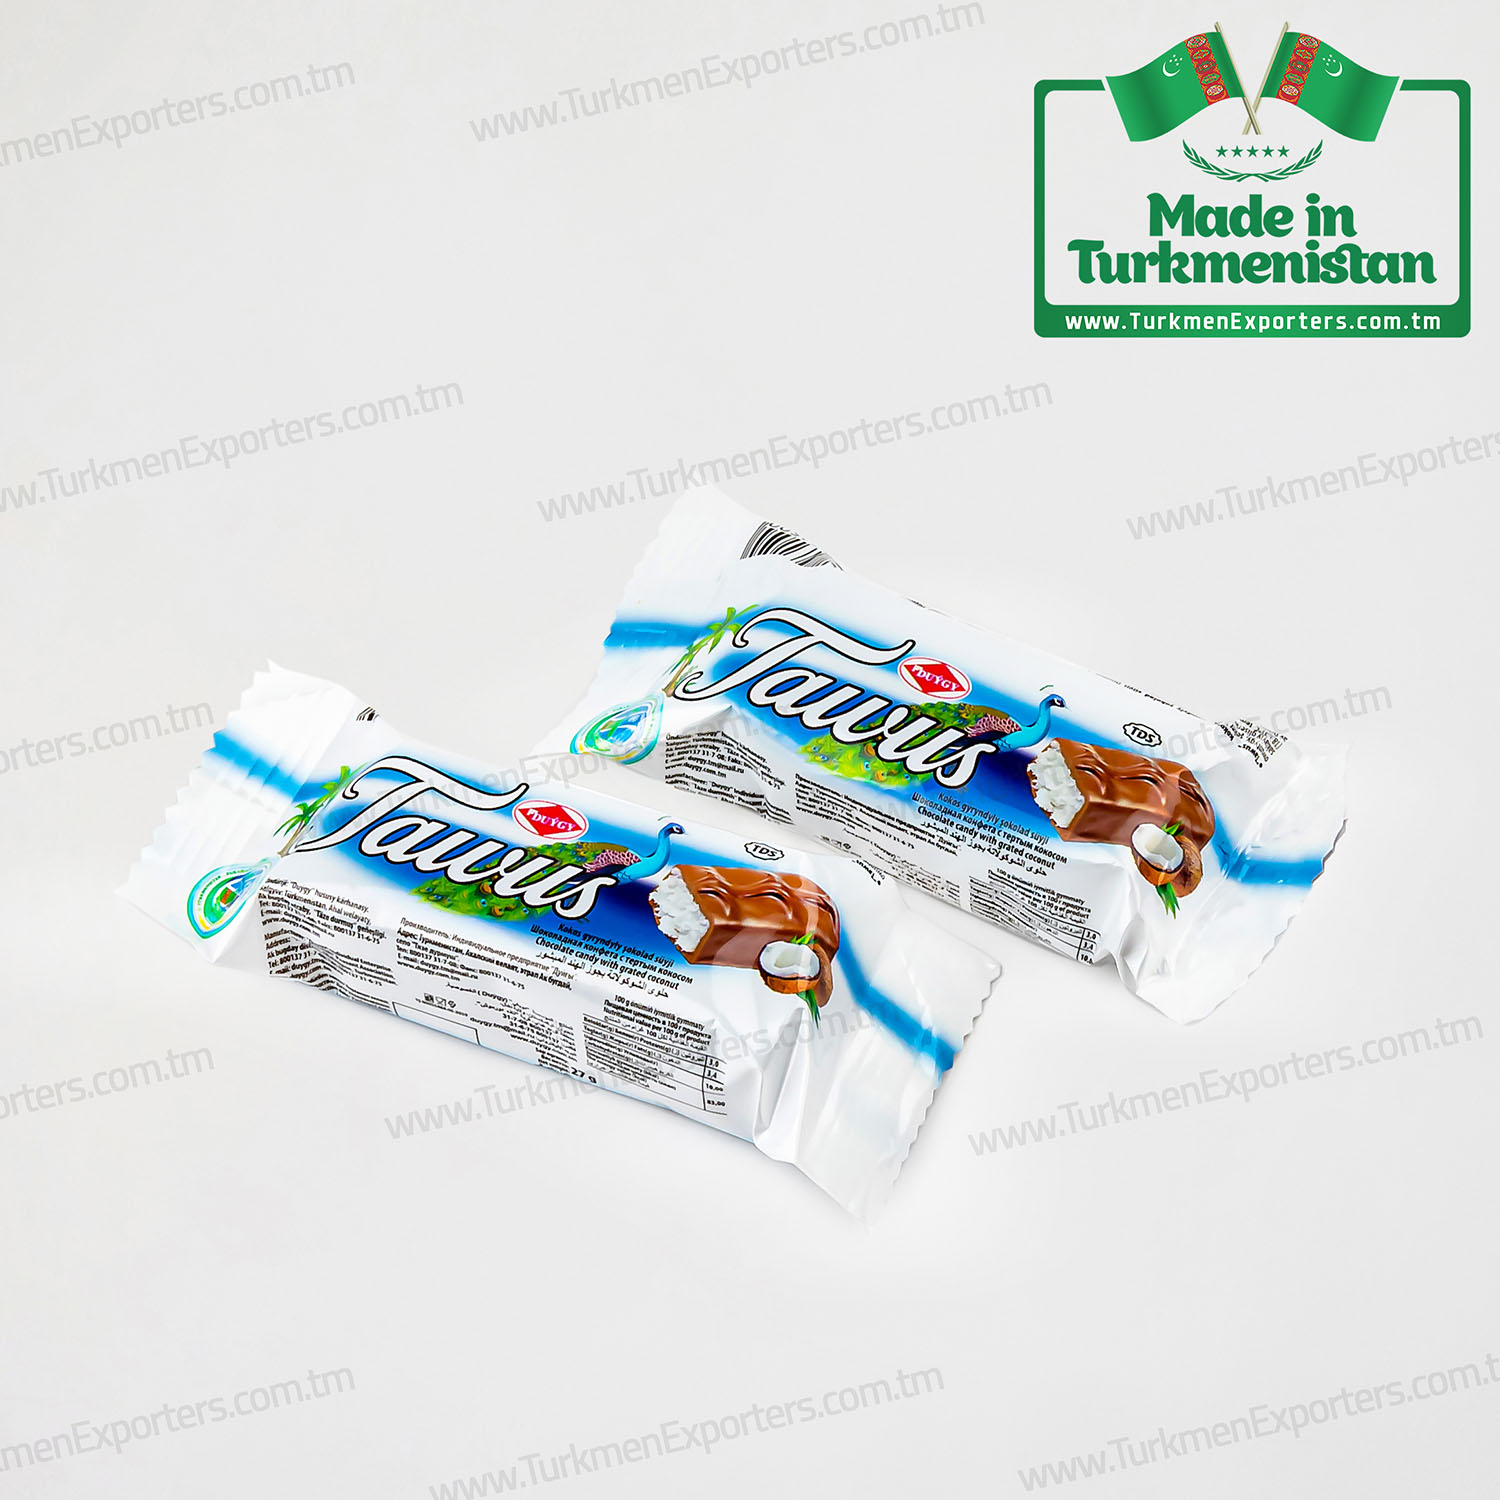 Coconut chocolate candy  Made in Turkmenistan  | Duygy individual enterprise